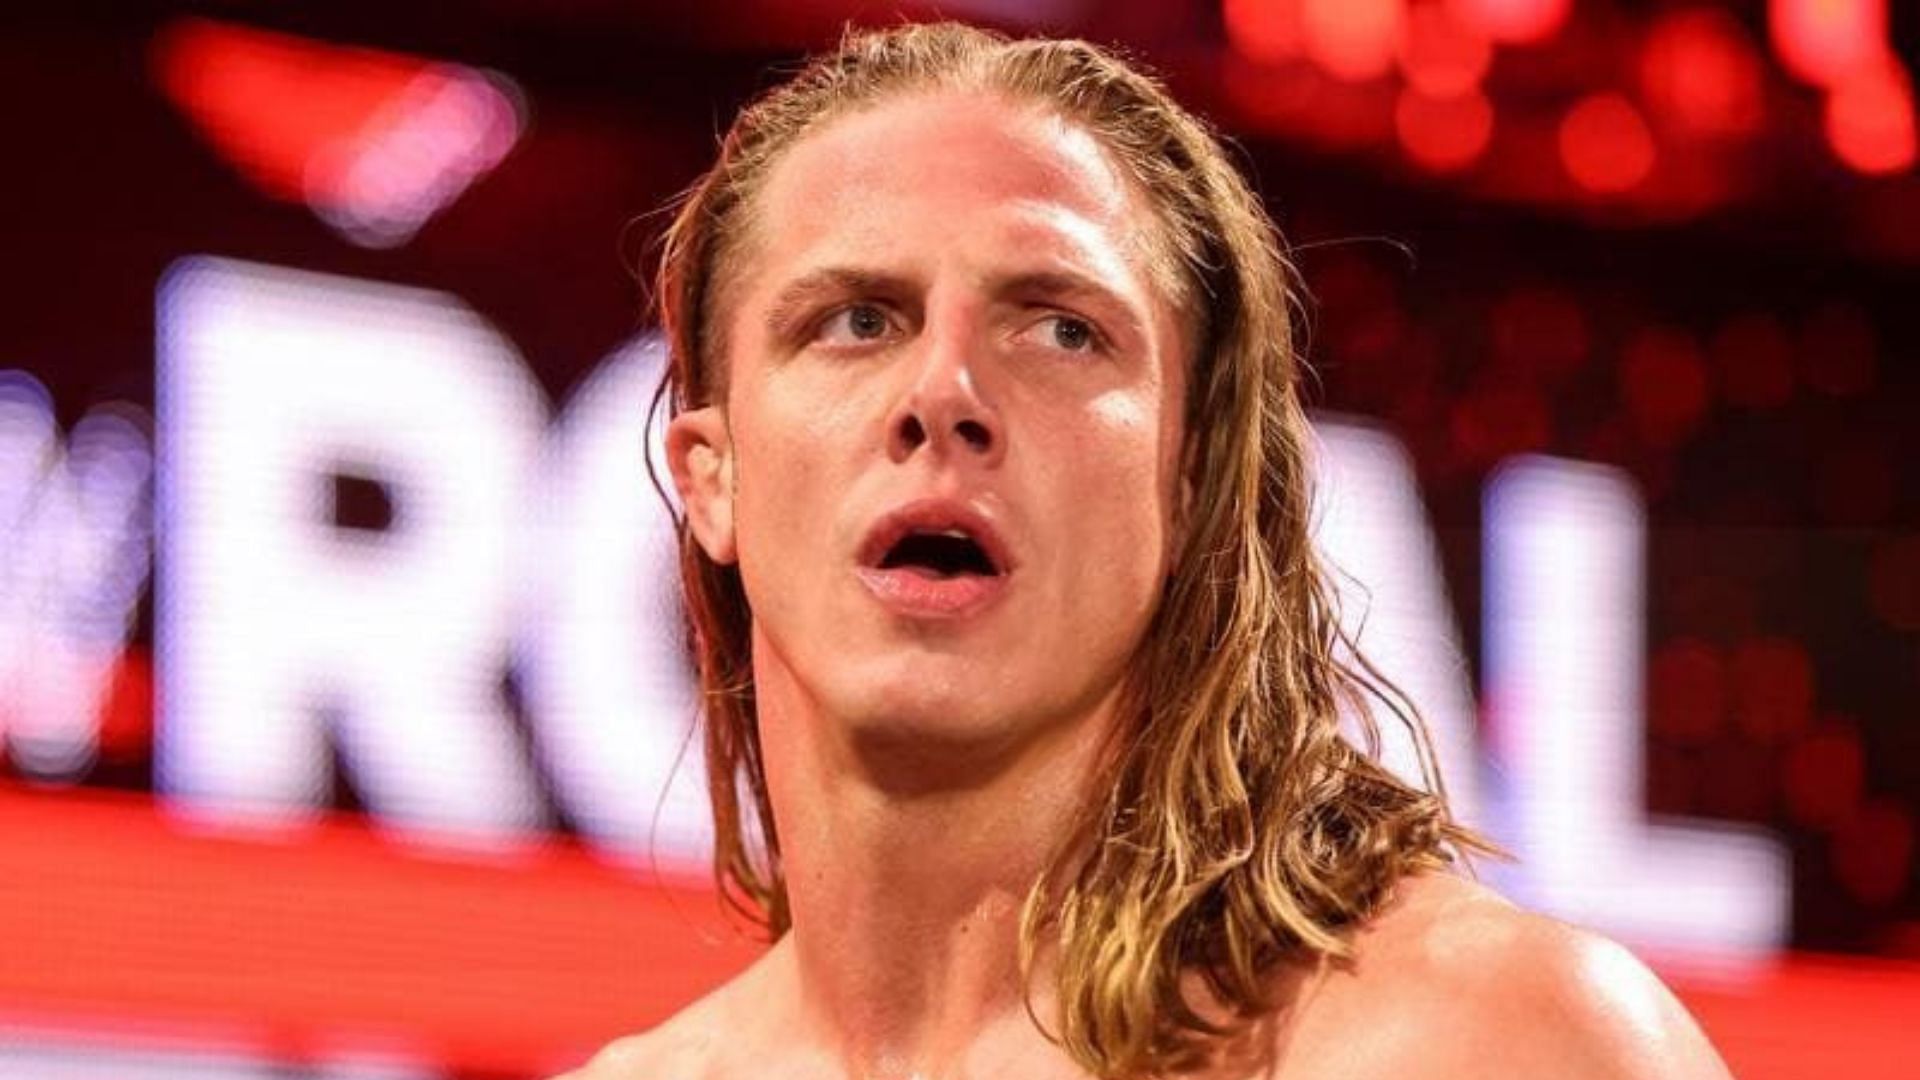 Matt Riddle is currently working under the red brand of Monday Night RAW